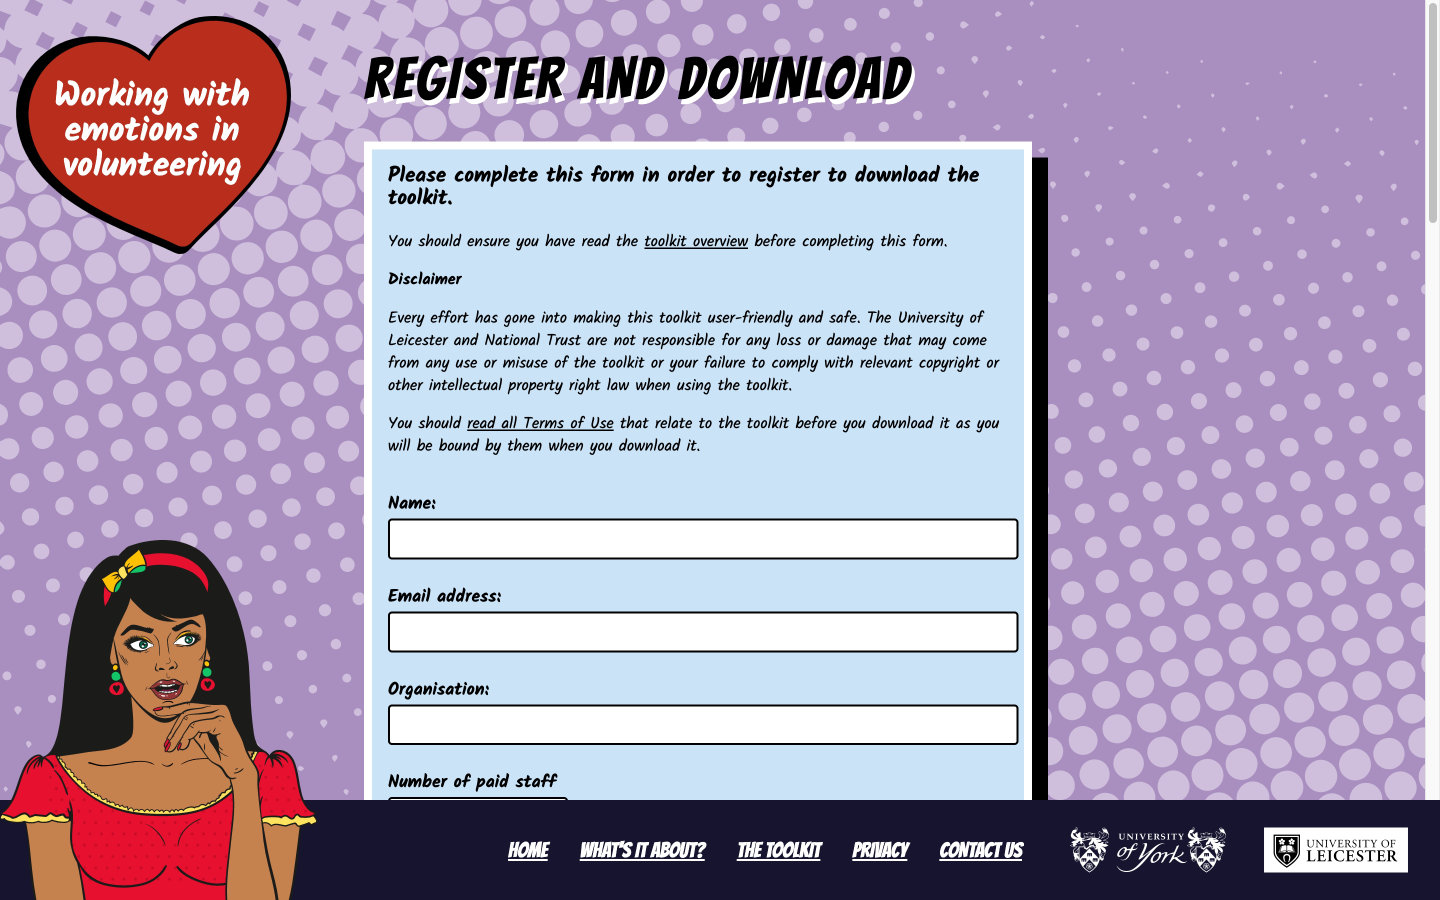 A screen shot of the sign up form for the website.